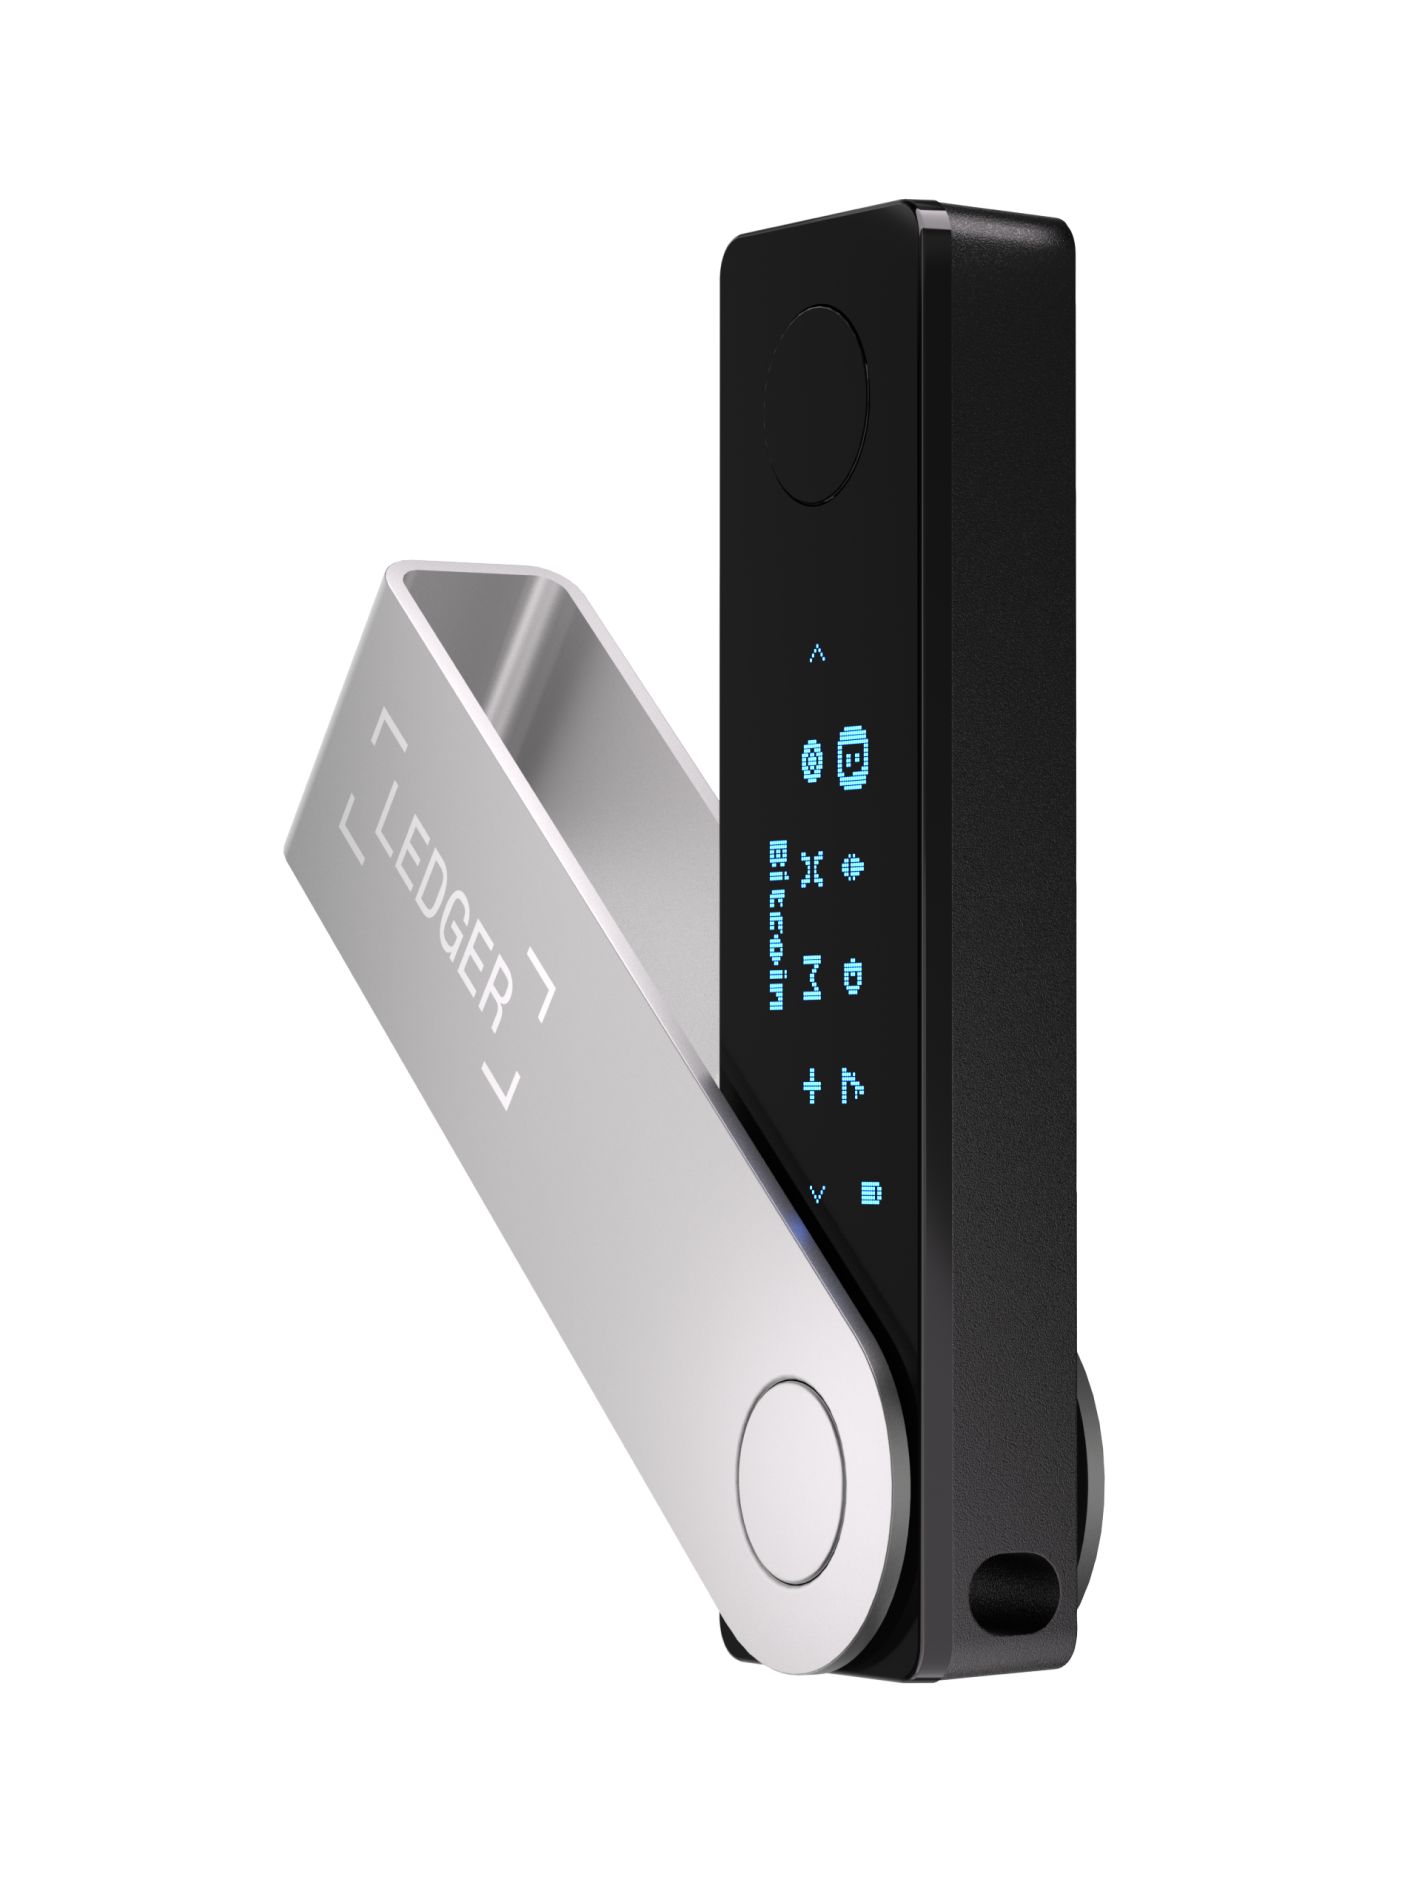 How To Send Bitcoin To Ledger Nano S In 7 Easy Steps